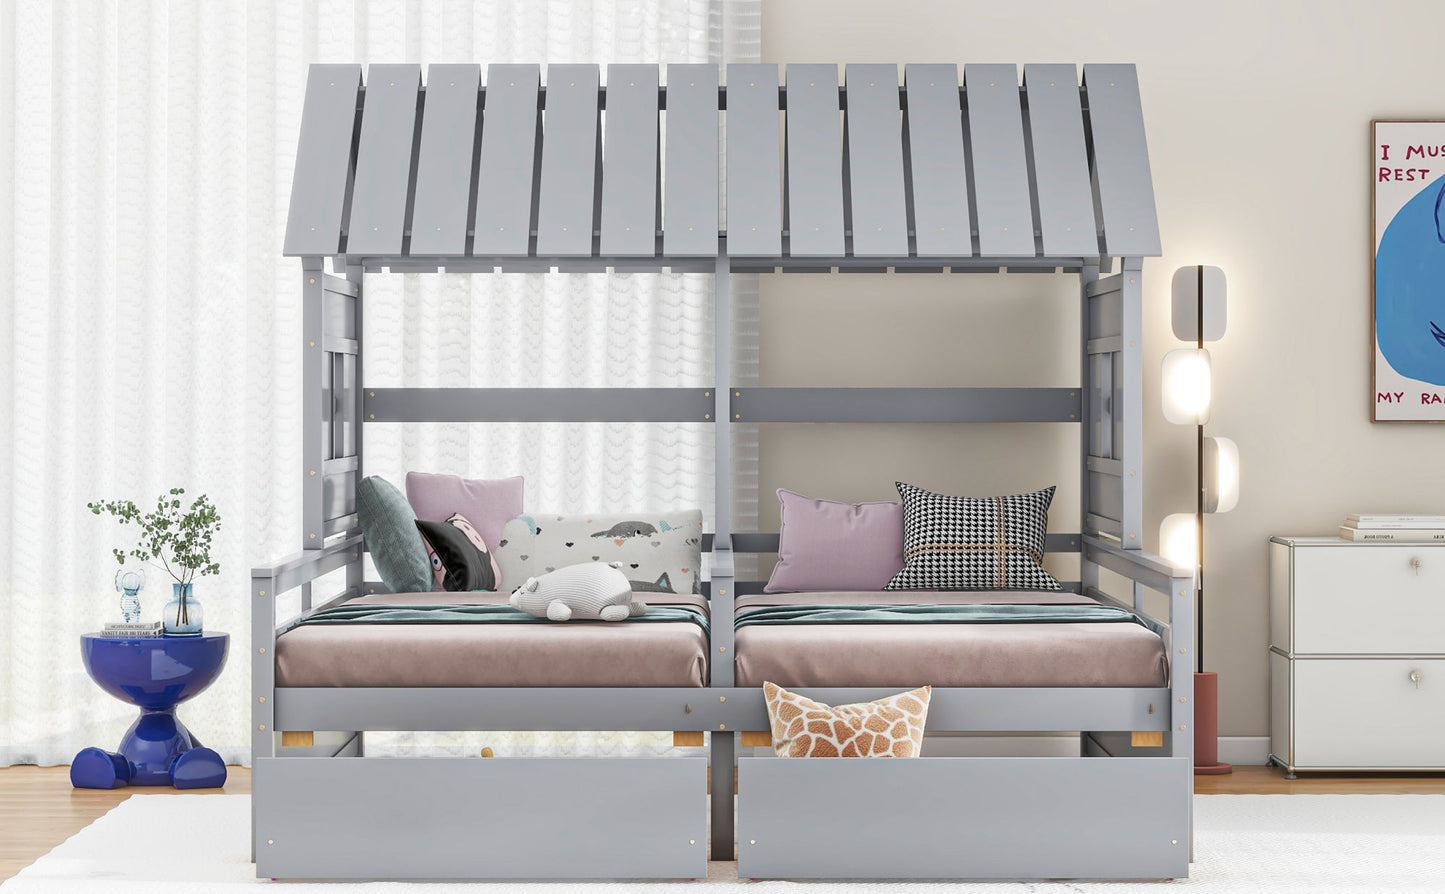 Twin Size House Platform Beds with Two Drawers for Boy and Girl Shared Beds, Combination of 2 Side by Side Twin Size Beds, Gray